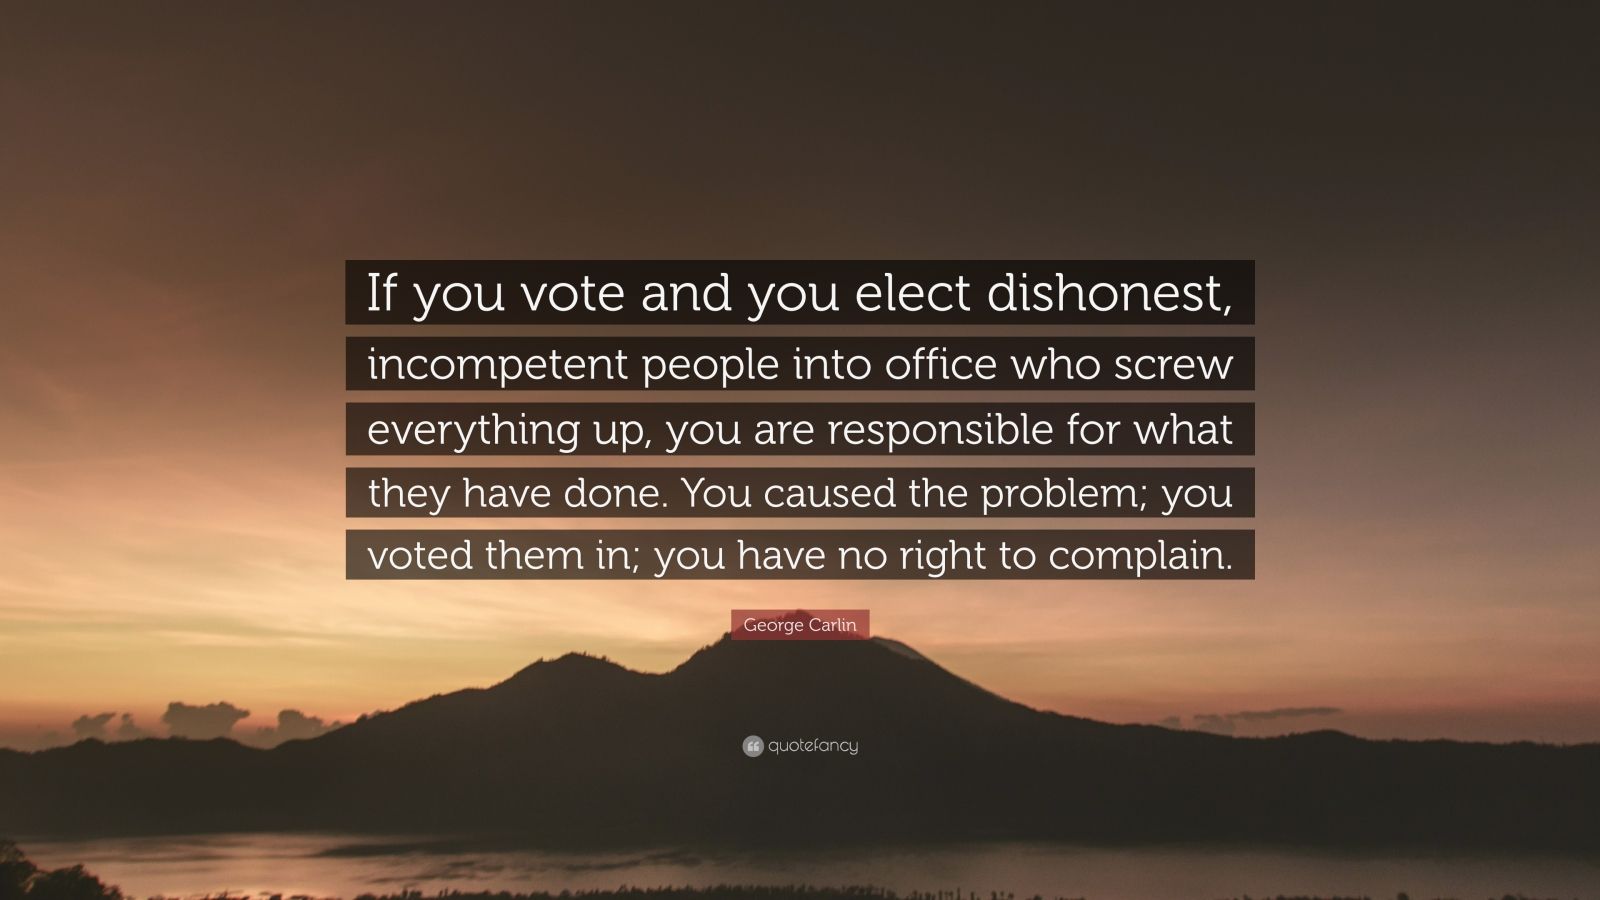 George Carlin Quote: “If you vote and you elect dishonest, incompetent